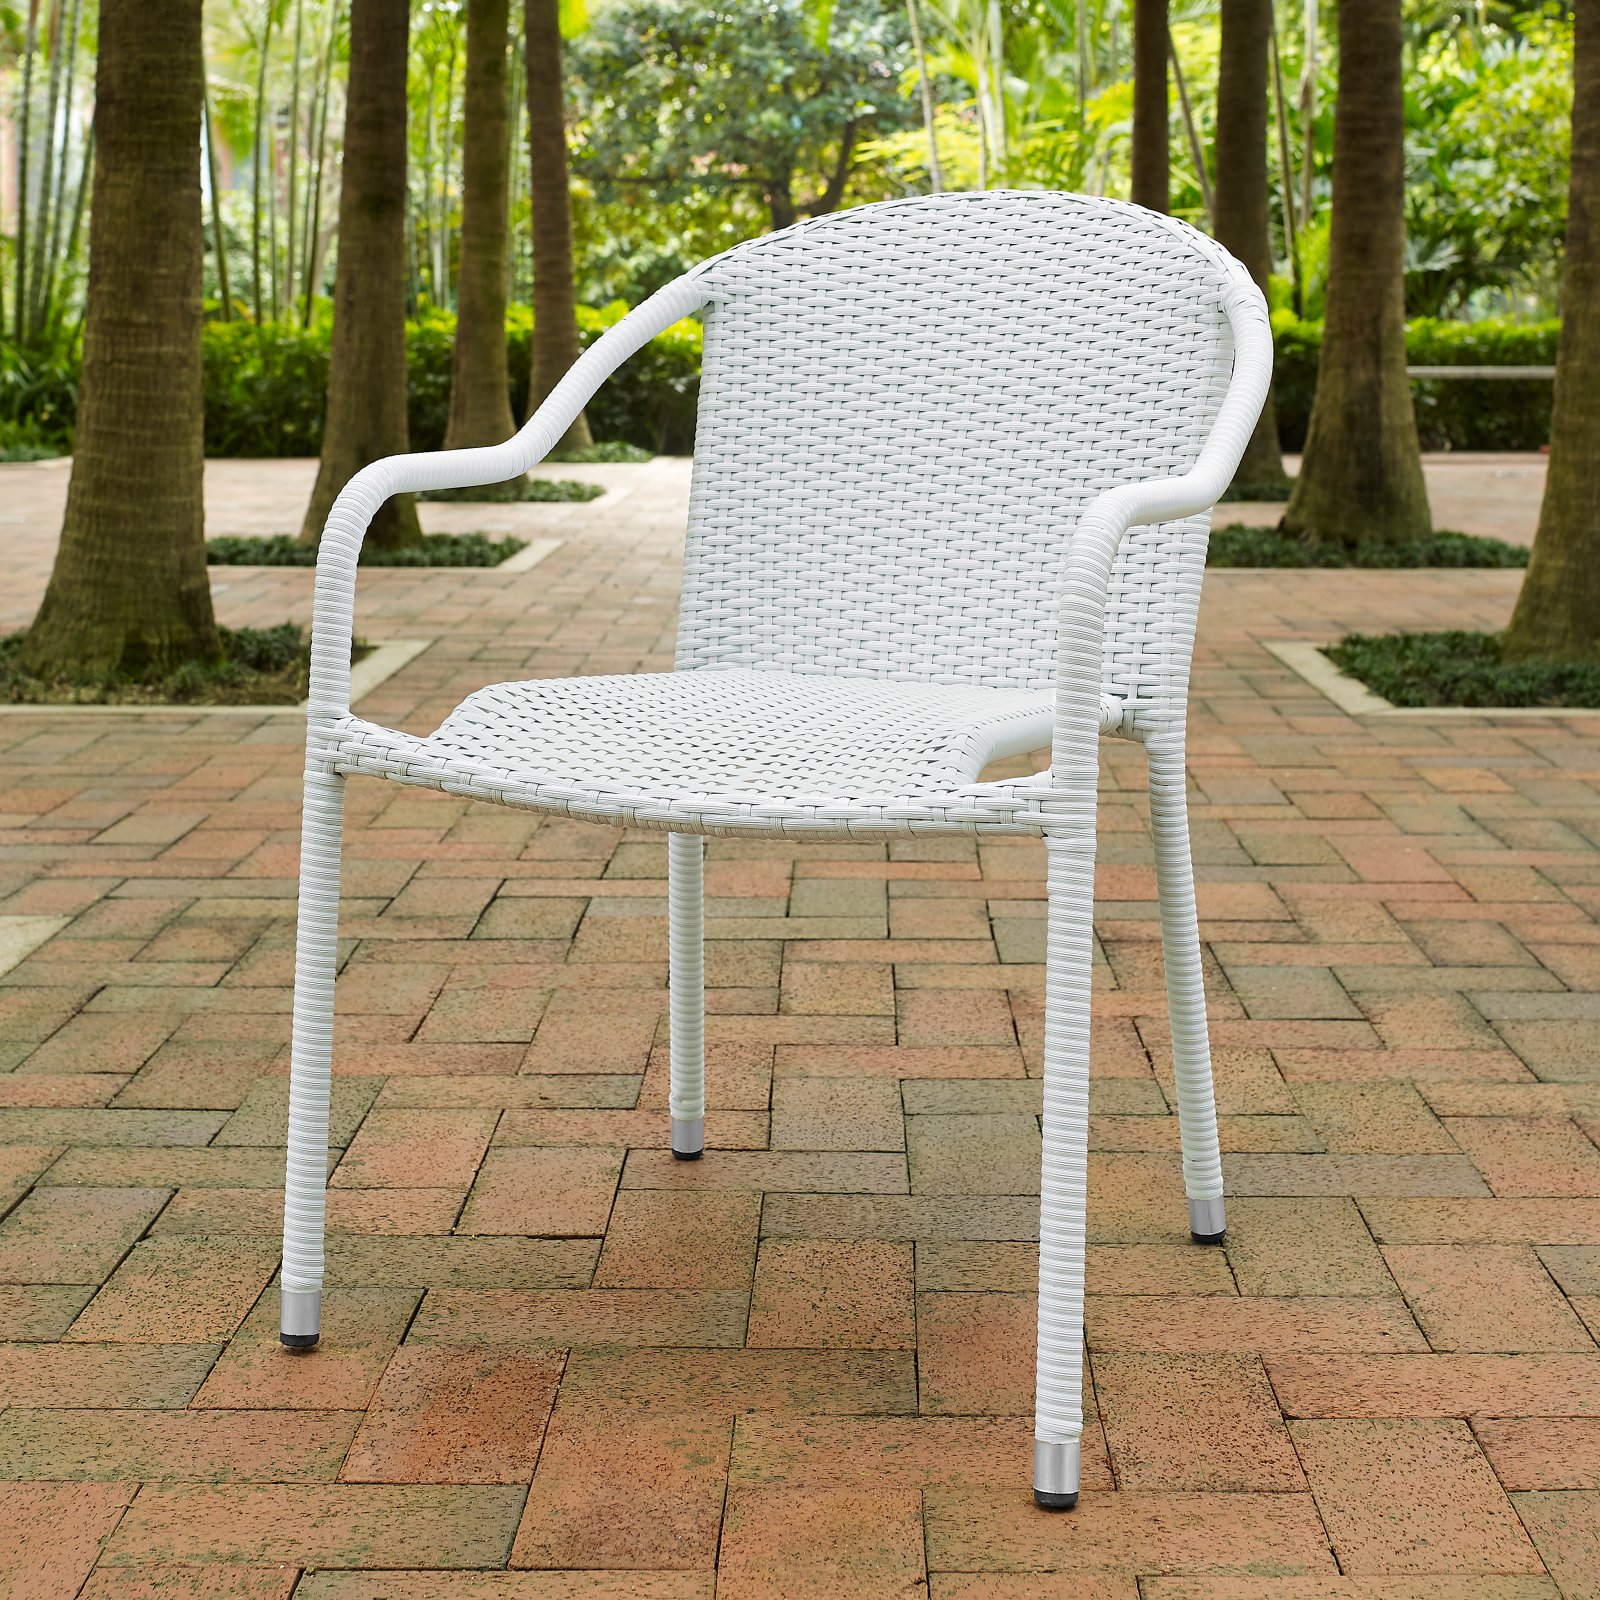 Crosley Furniture Palm Harbor 4-Piece Stackable Outdoor Chair Set, Wicker Patio Chairs for Dining, Porch - image 2 of 3